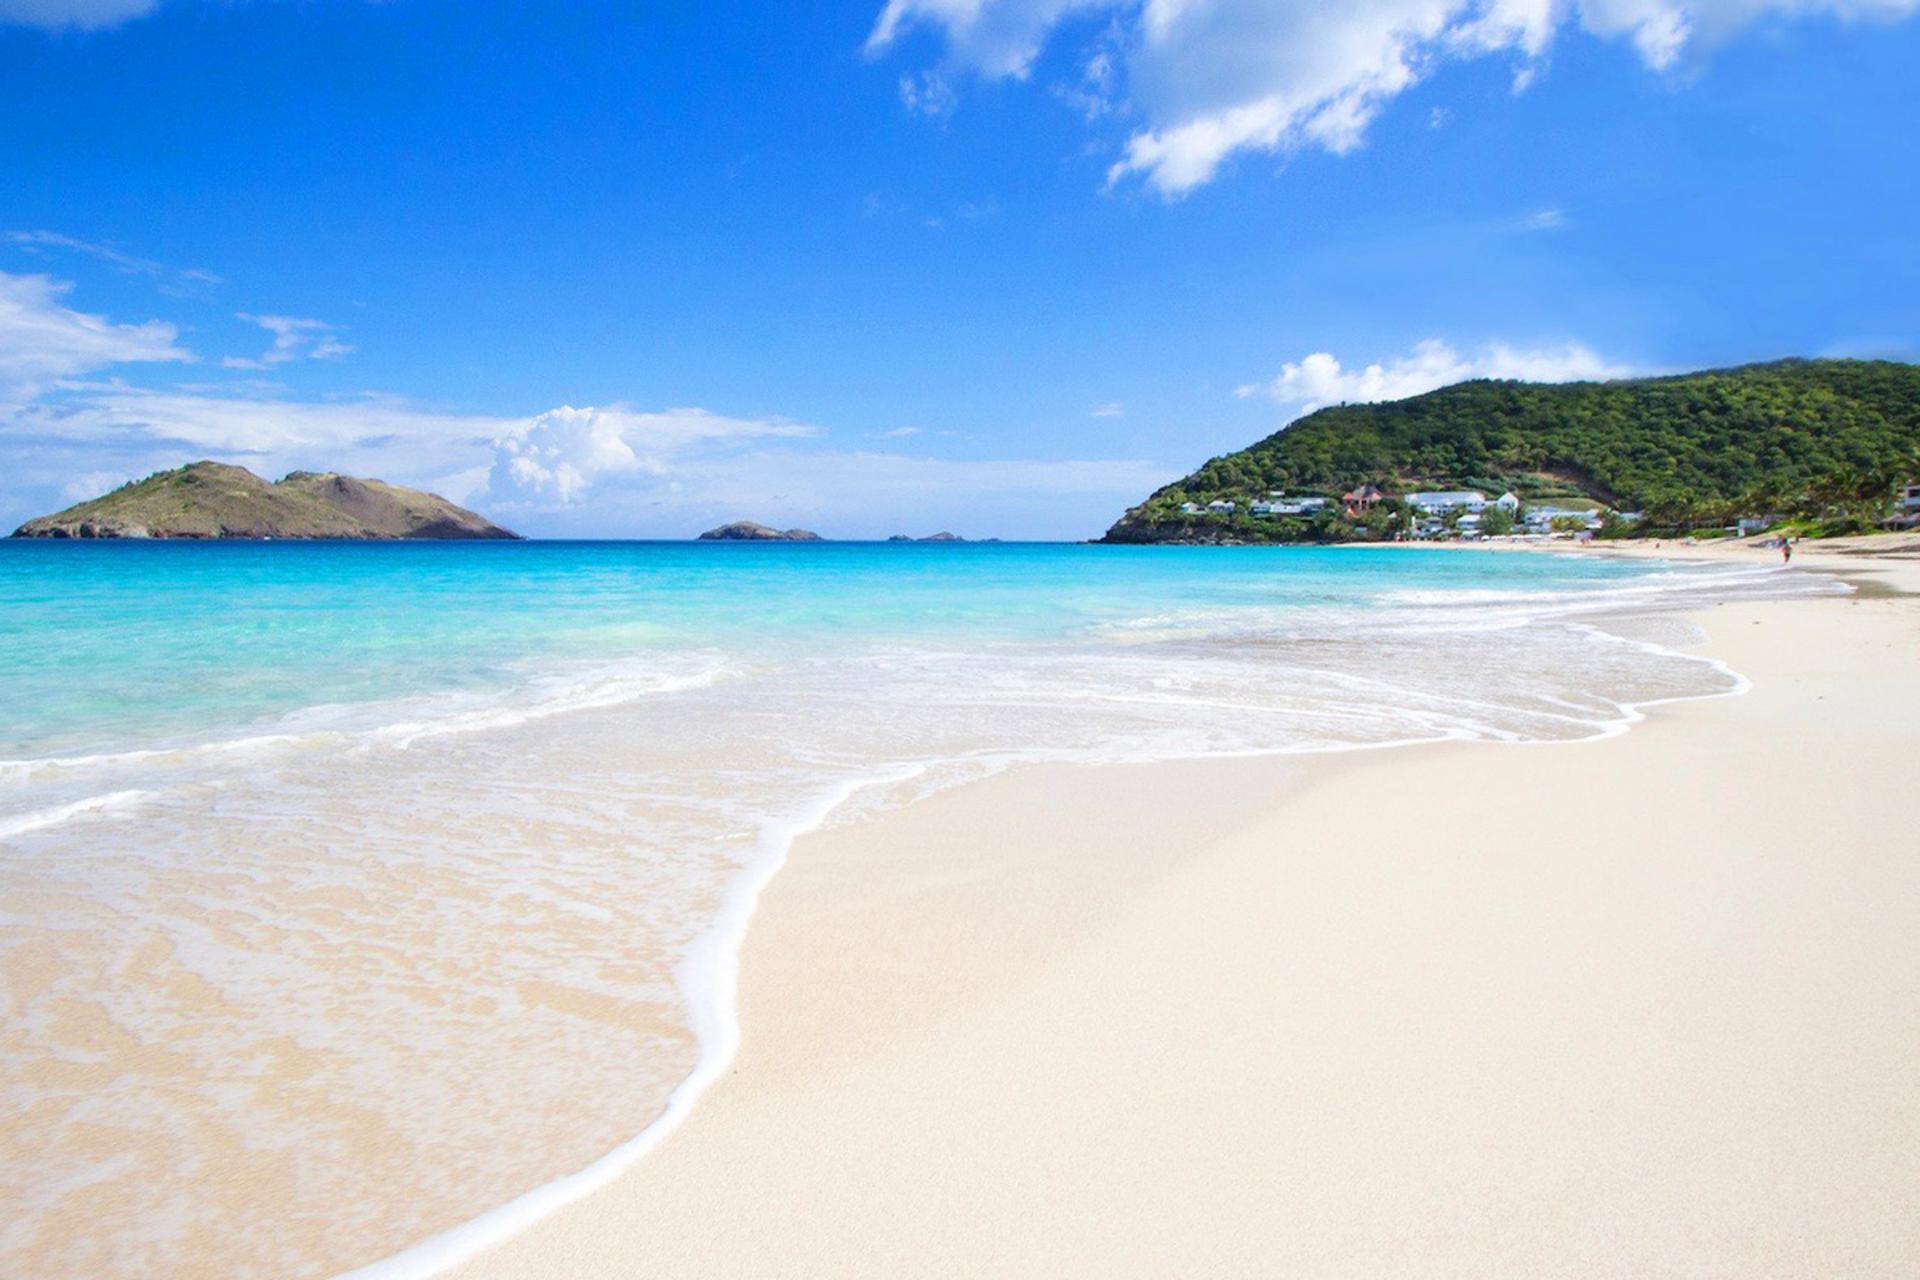 St Barts Beaches - Ultimate Guide to the Best Beaches on St Barths